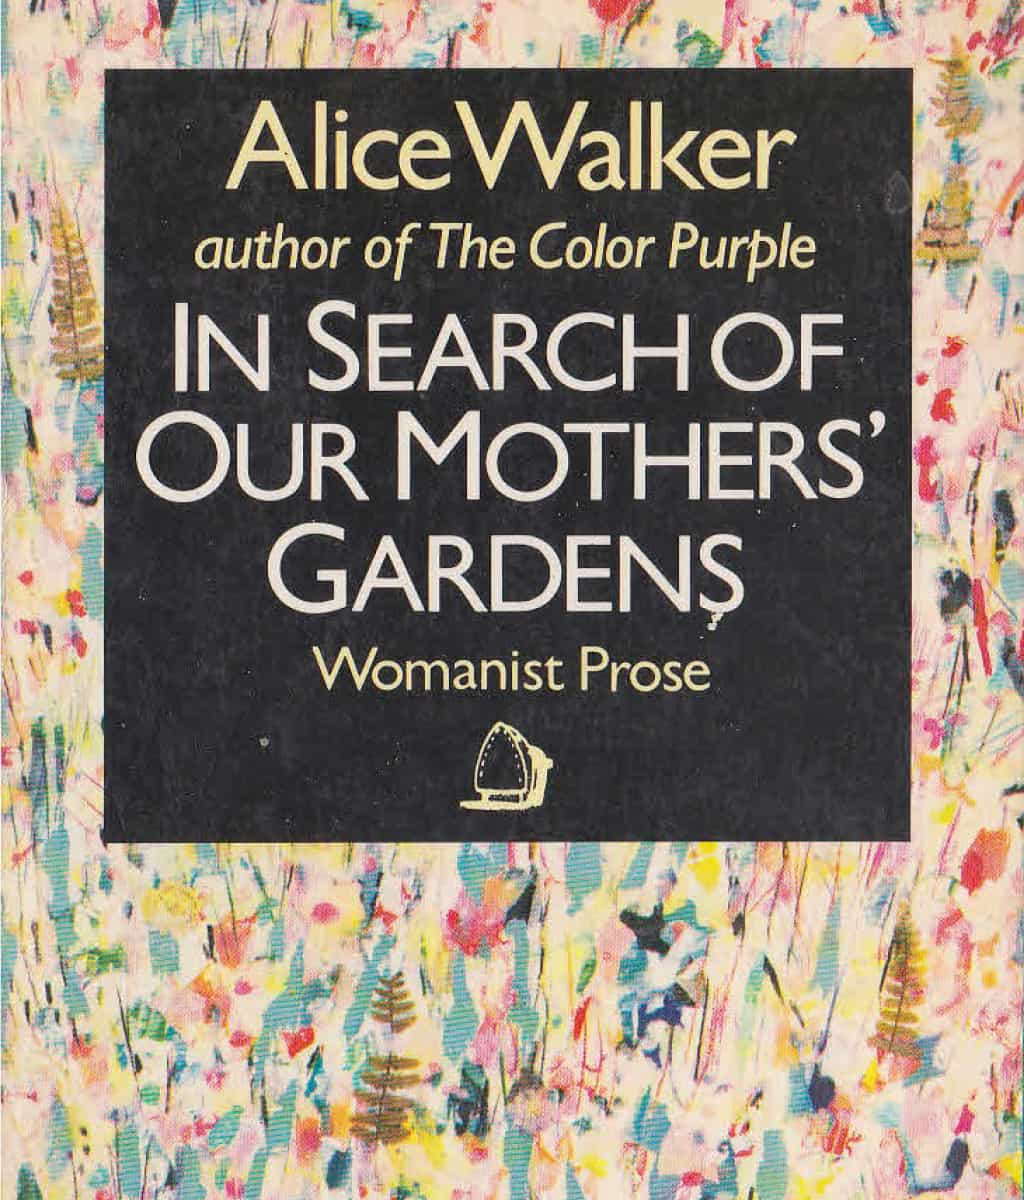 In Search of Our Mother's Gardens by Alive Walker